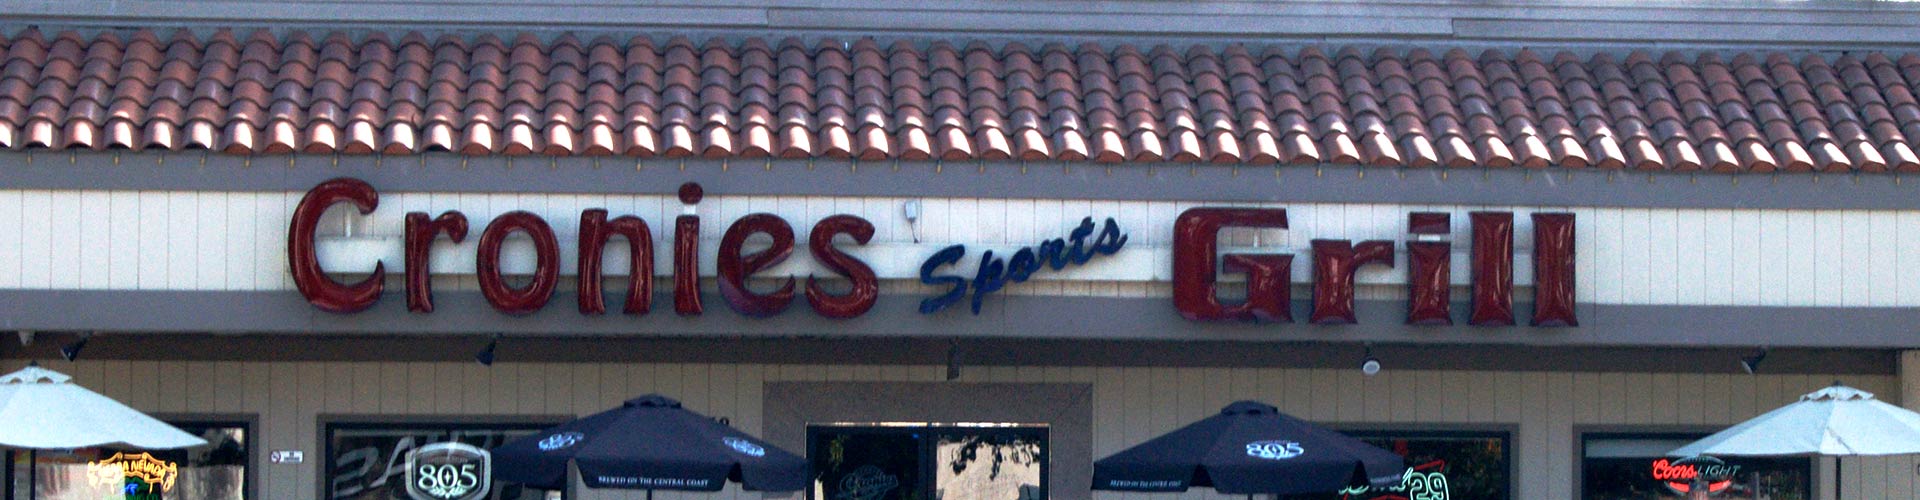 A restaurant with a sign that says cronies grill.